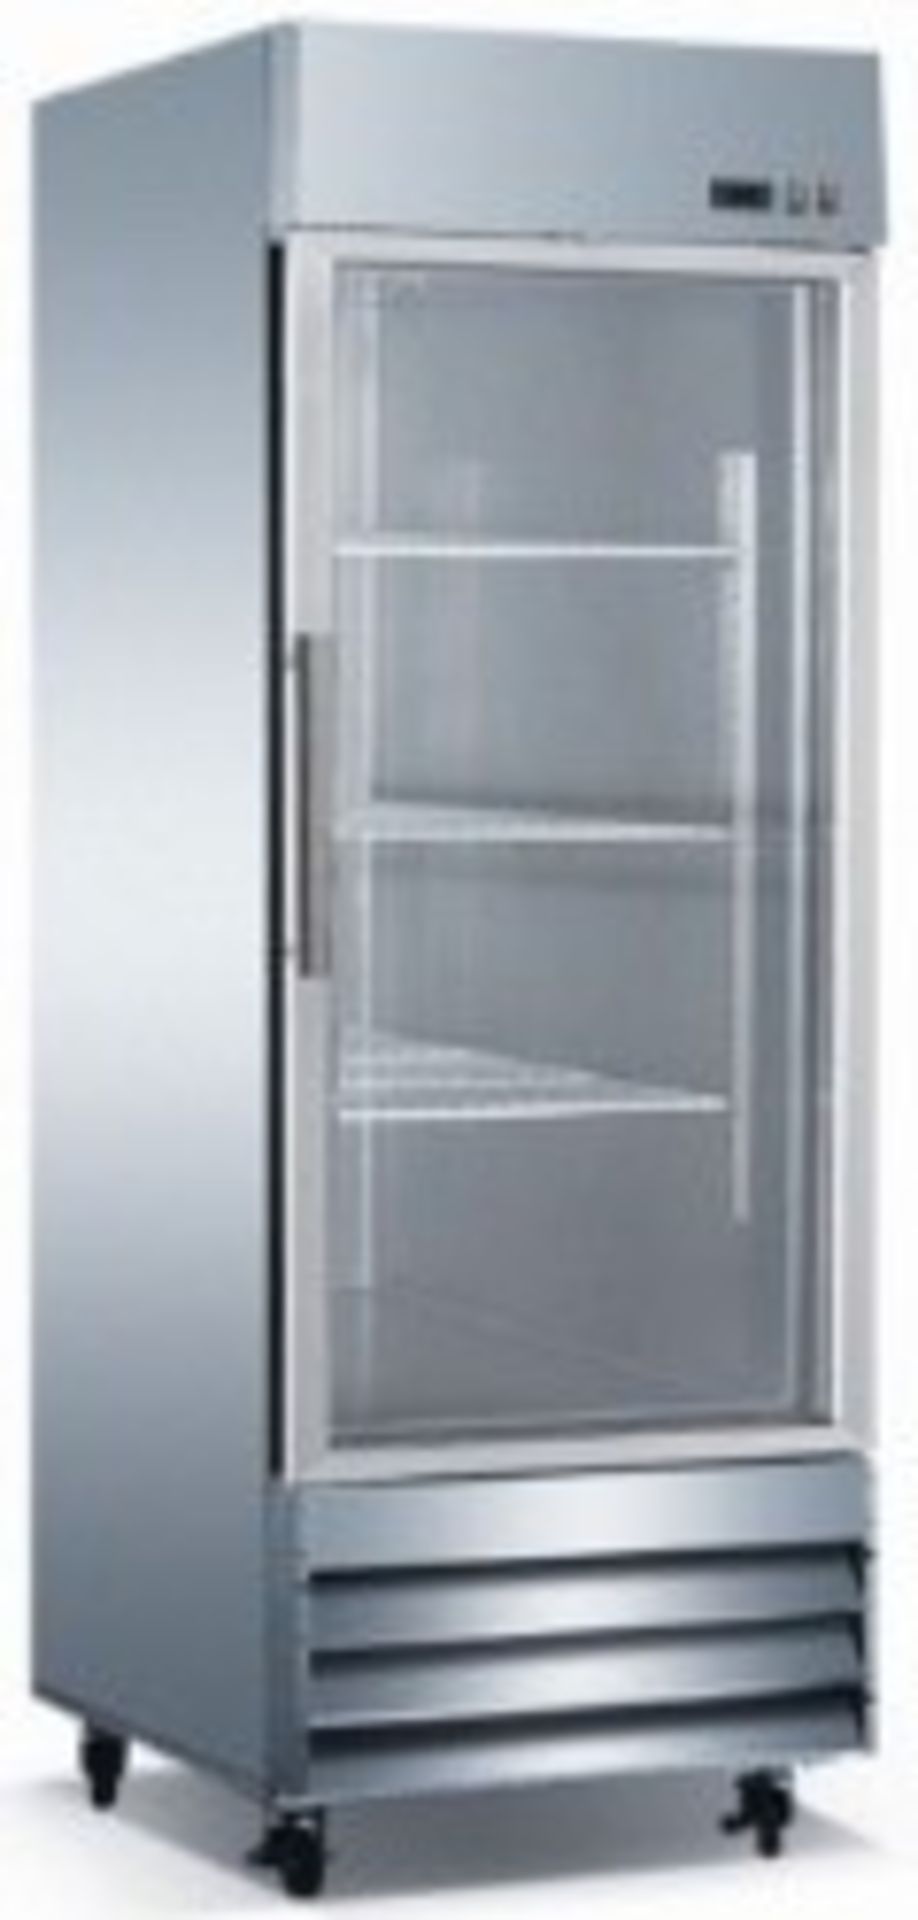 EQ Stainless Steel Reach-In Refrigerator 172 Gal, Silver Model #:CFD-1RR-GEHC L*W*H (inch):29*32.